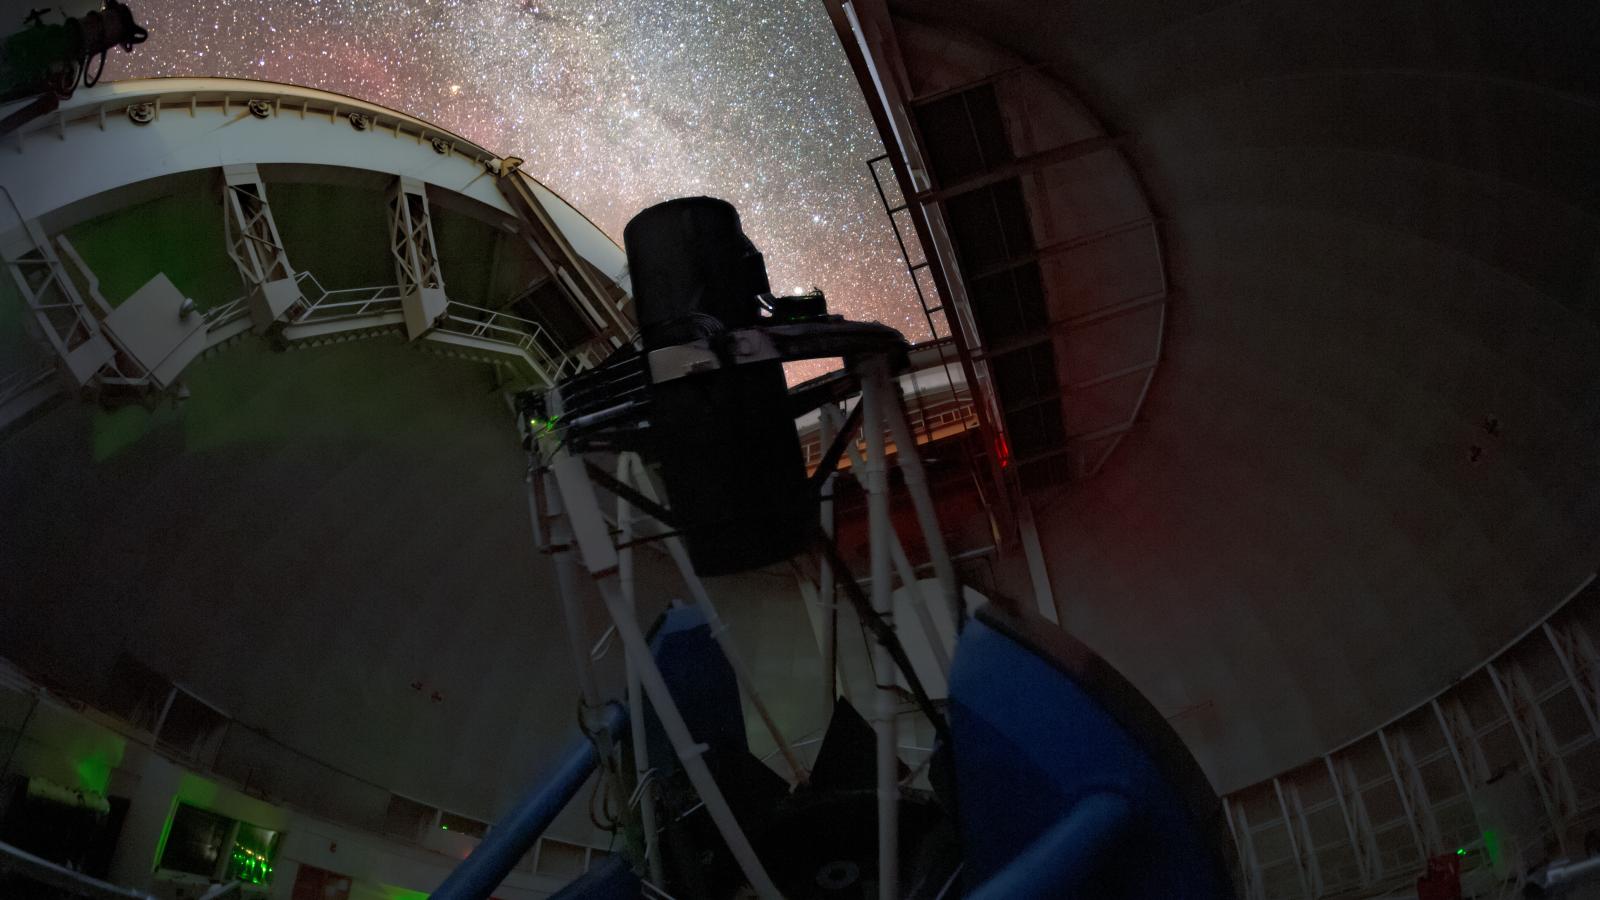 Telescope with stars above